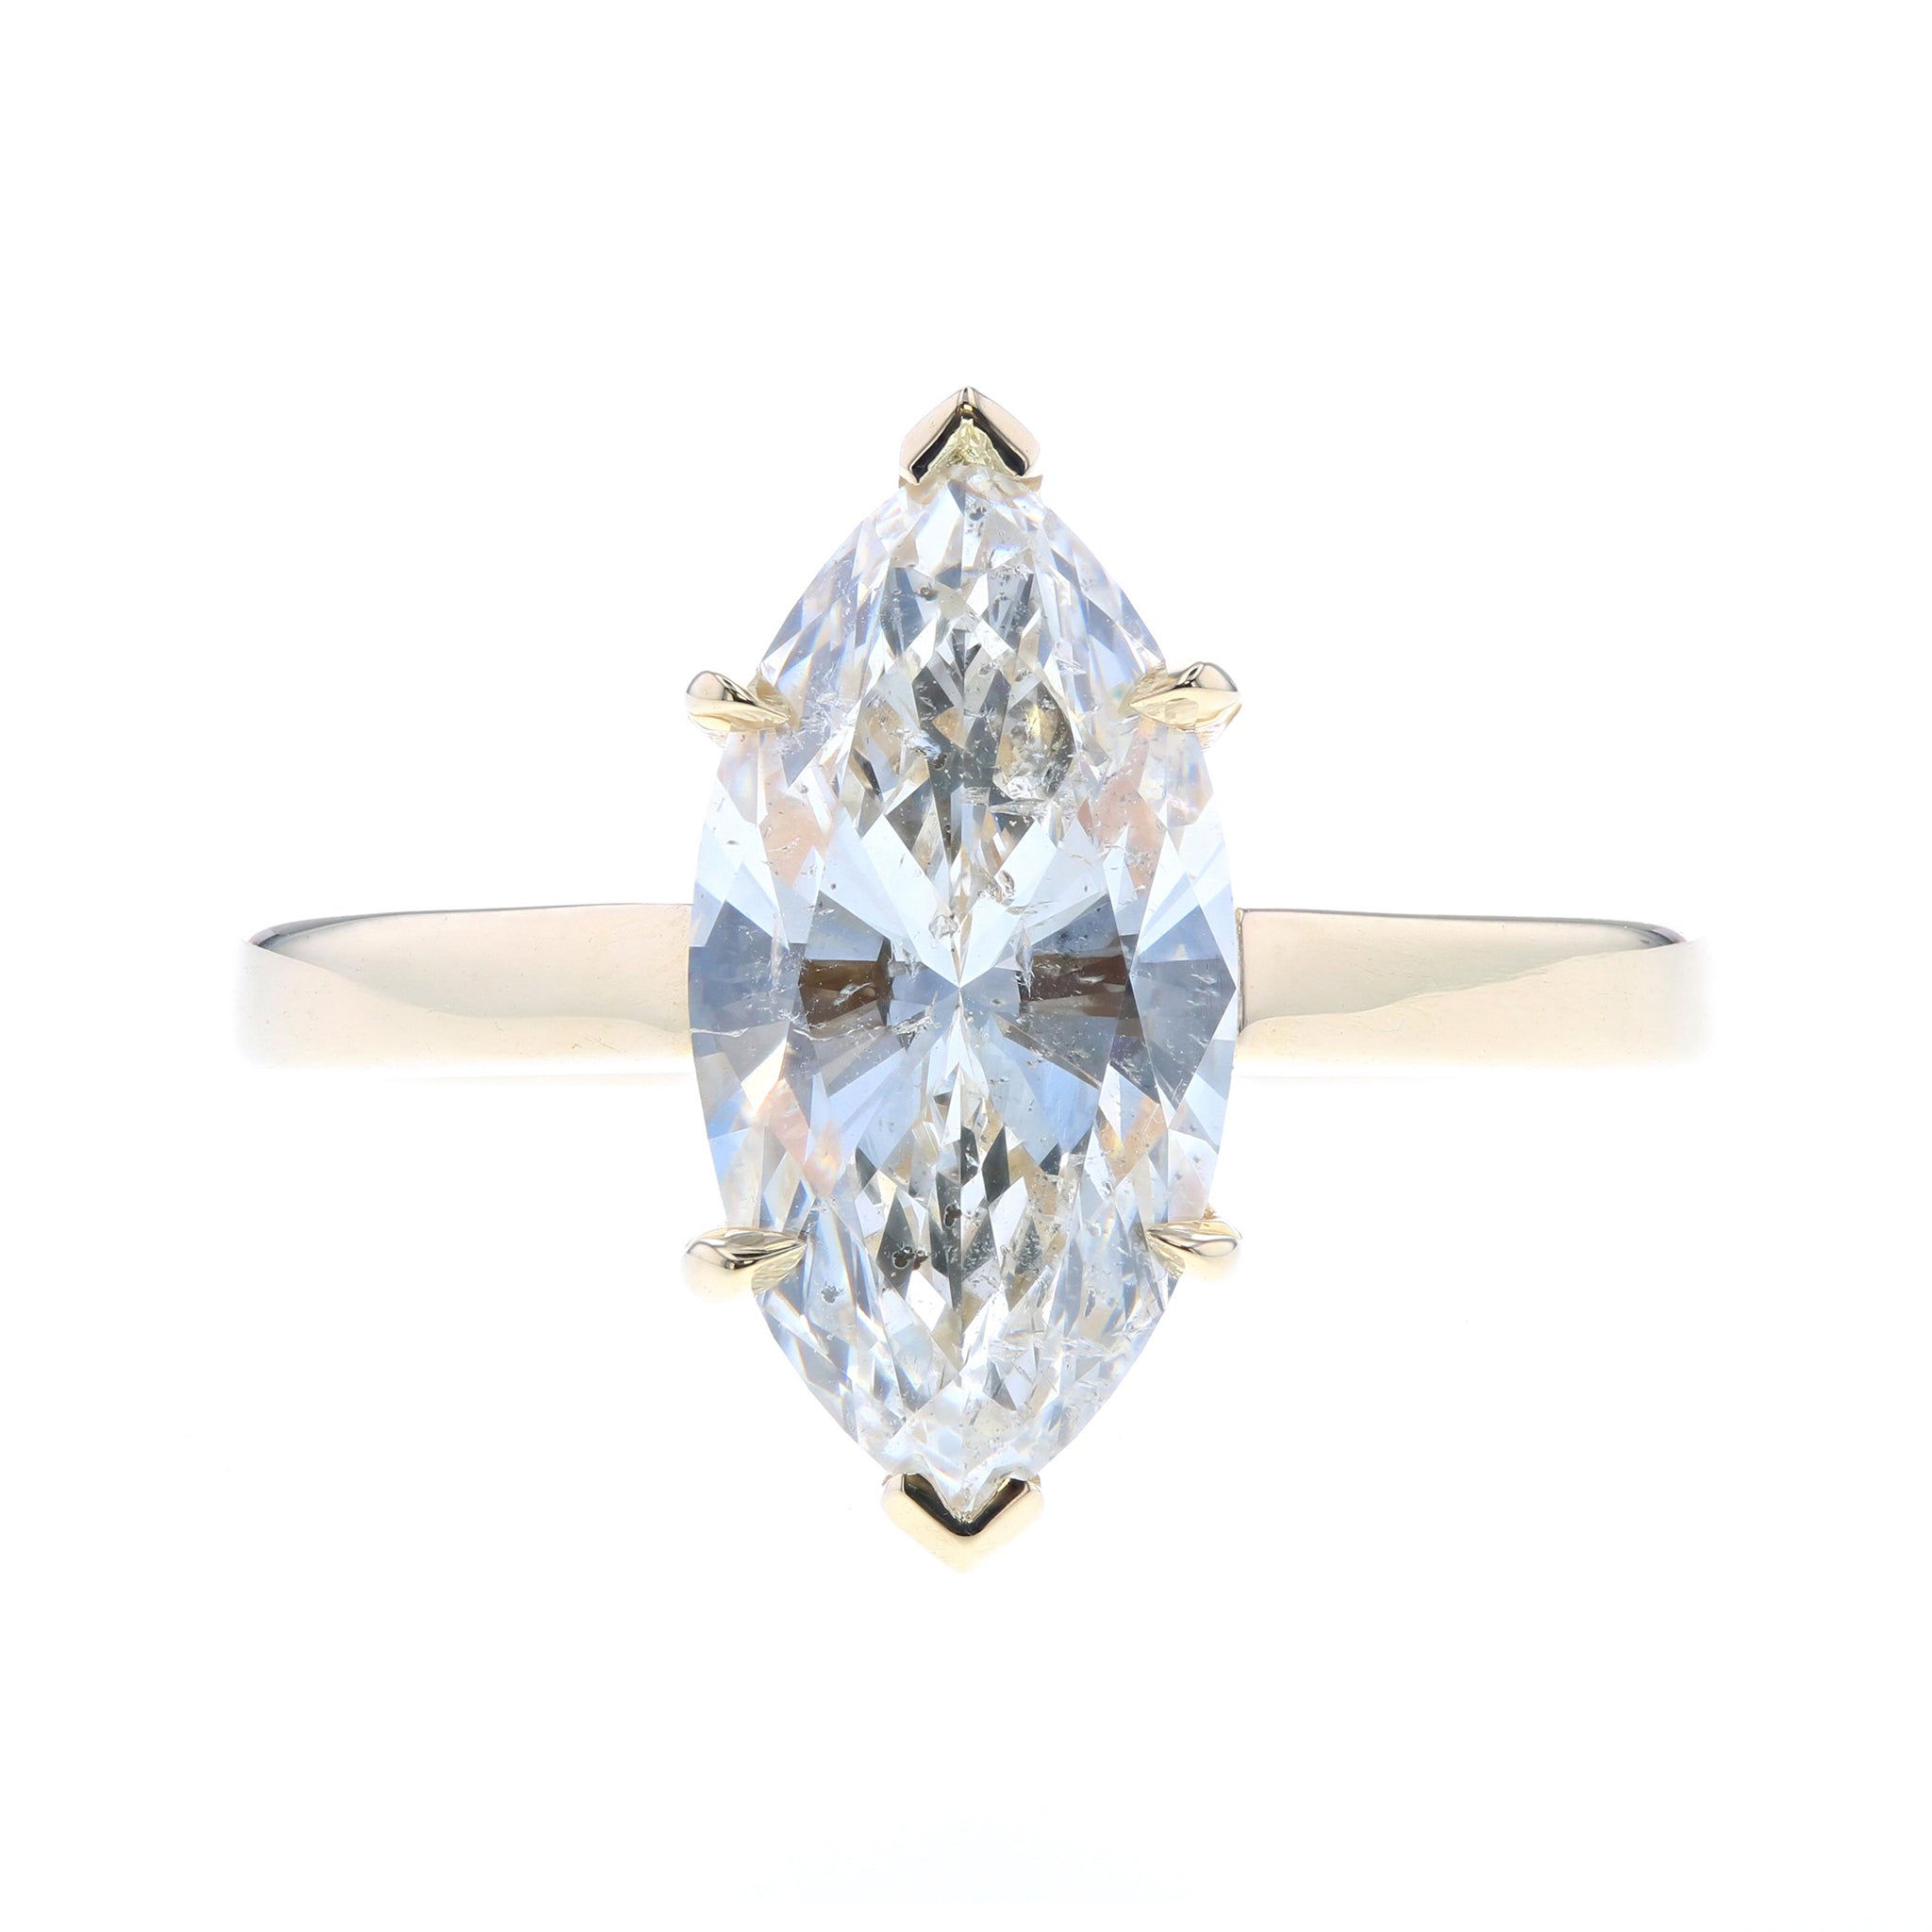 Marquise Diamond Engagement Ring in Yellow Gold Solitaire